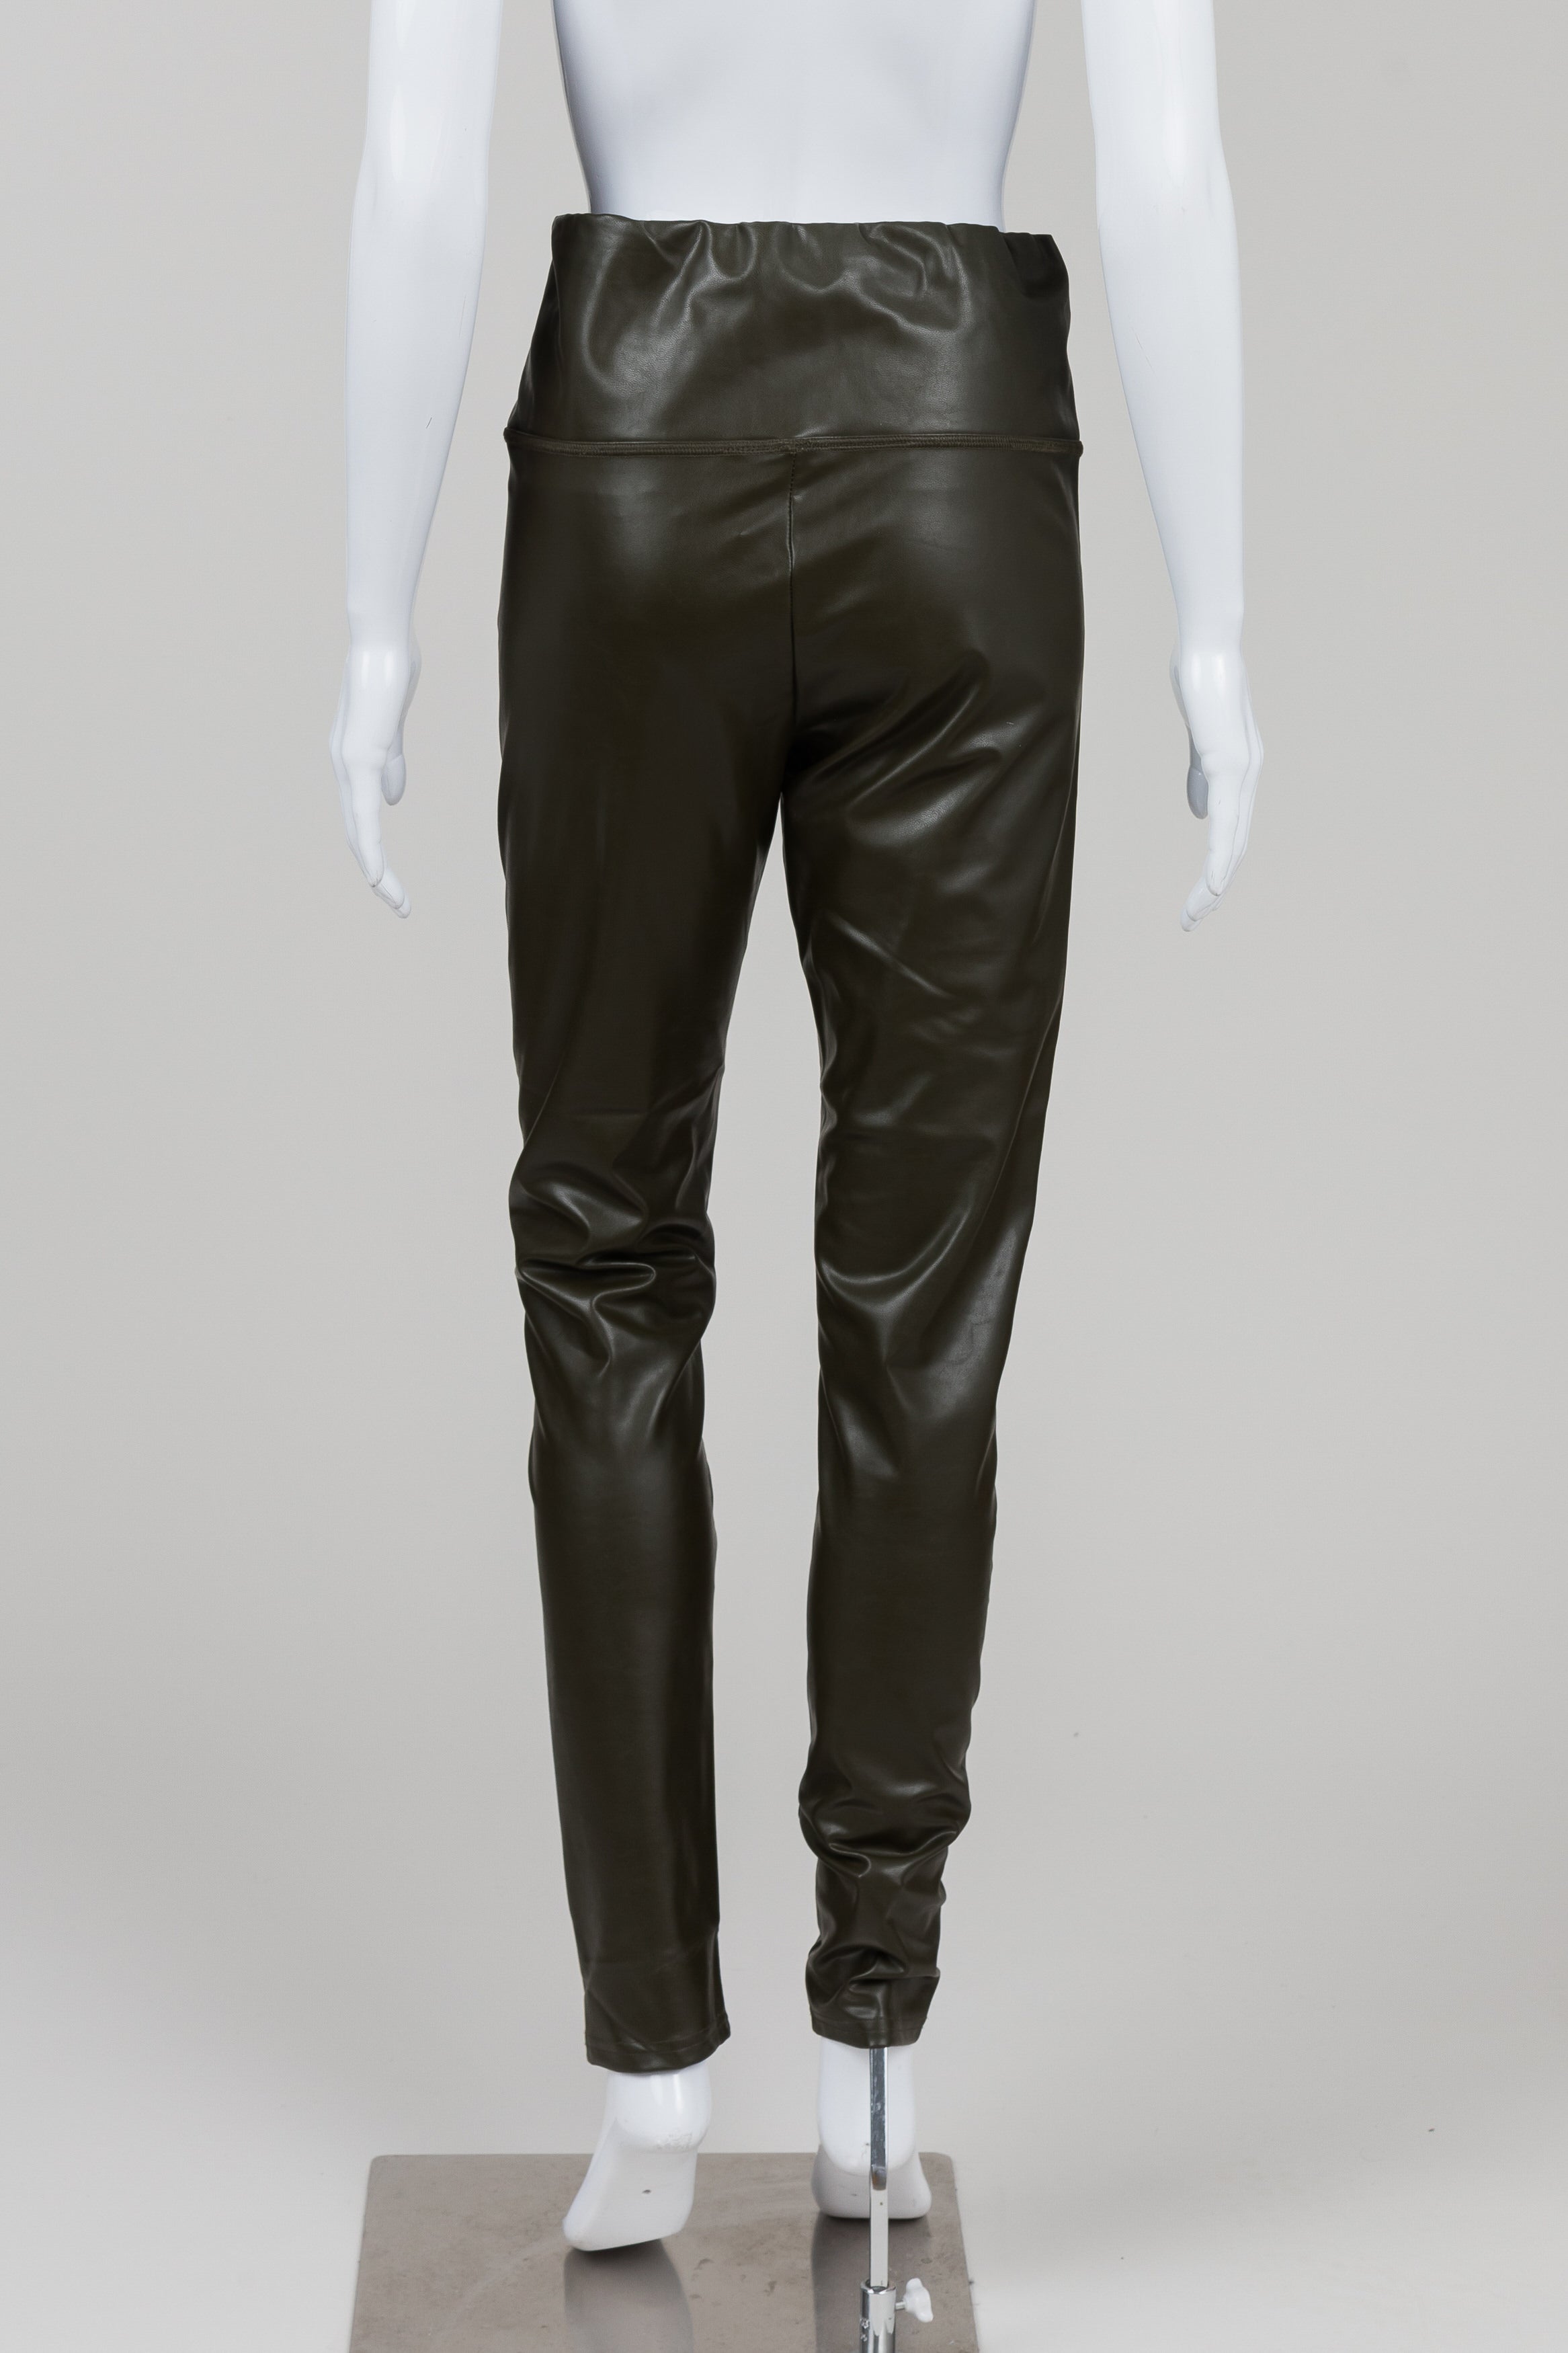 Saks Fifth Avenue Olive Faux Leather Skinny Pants (L)